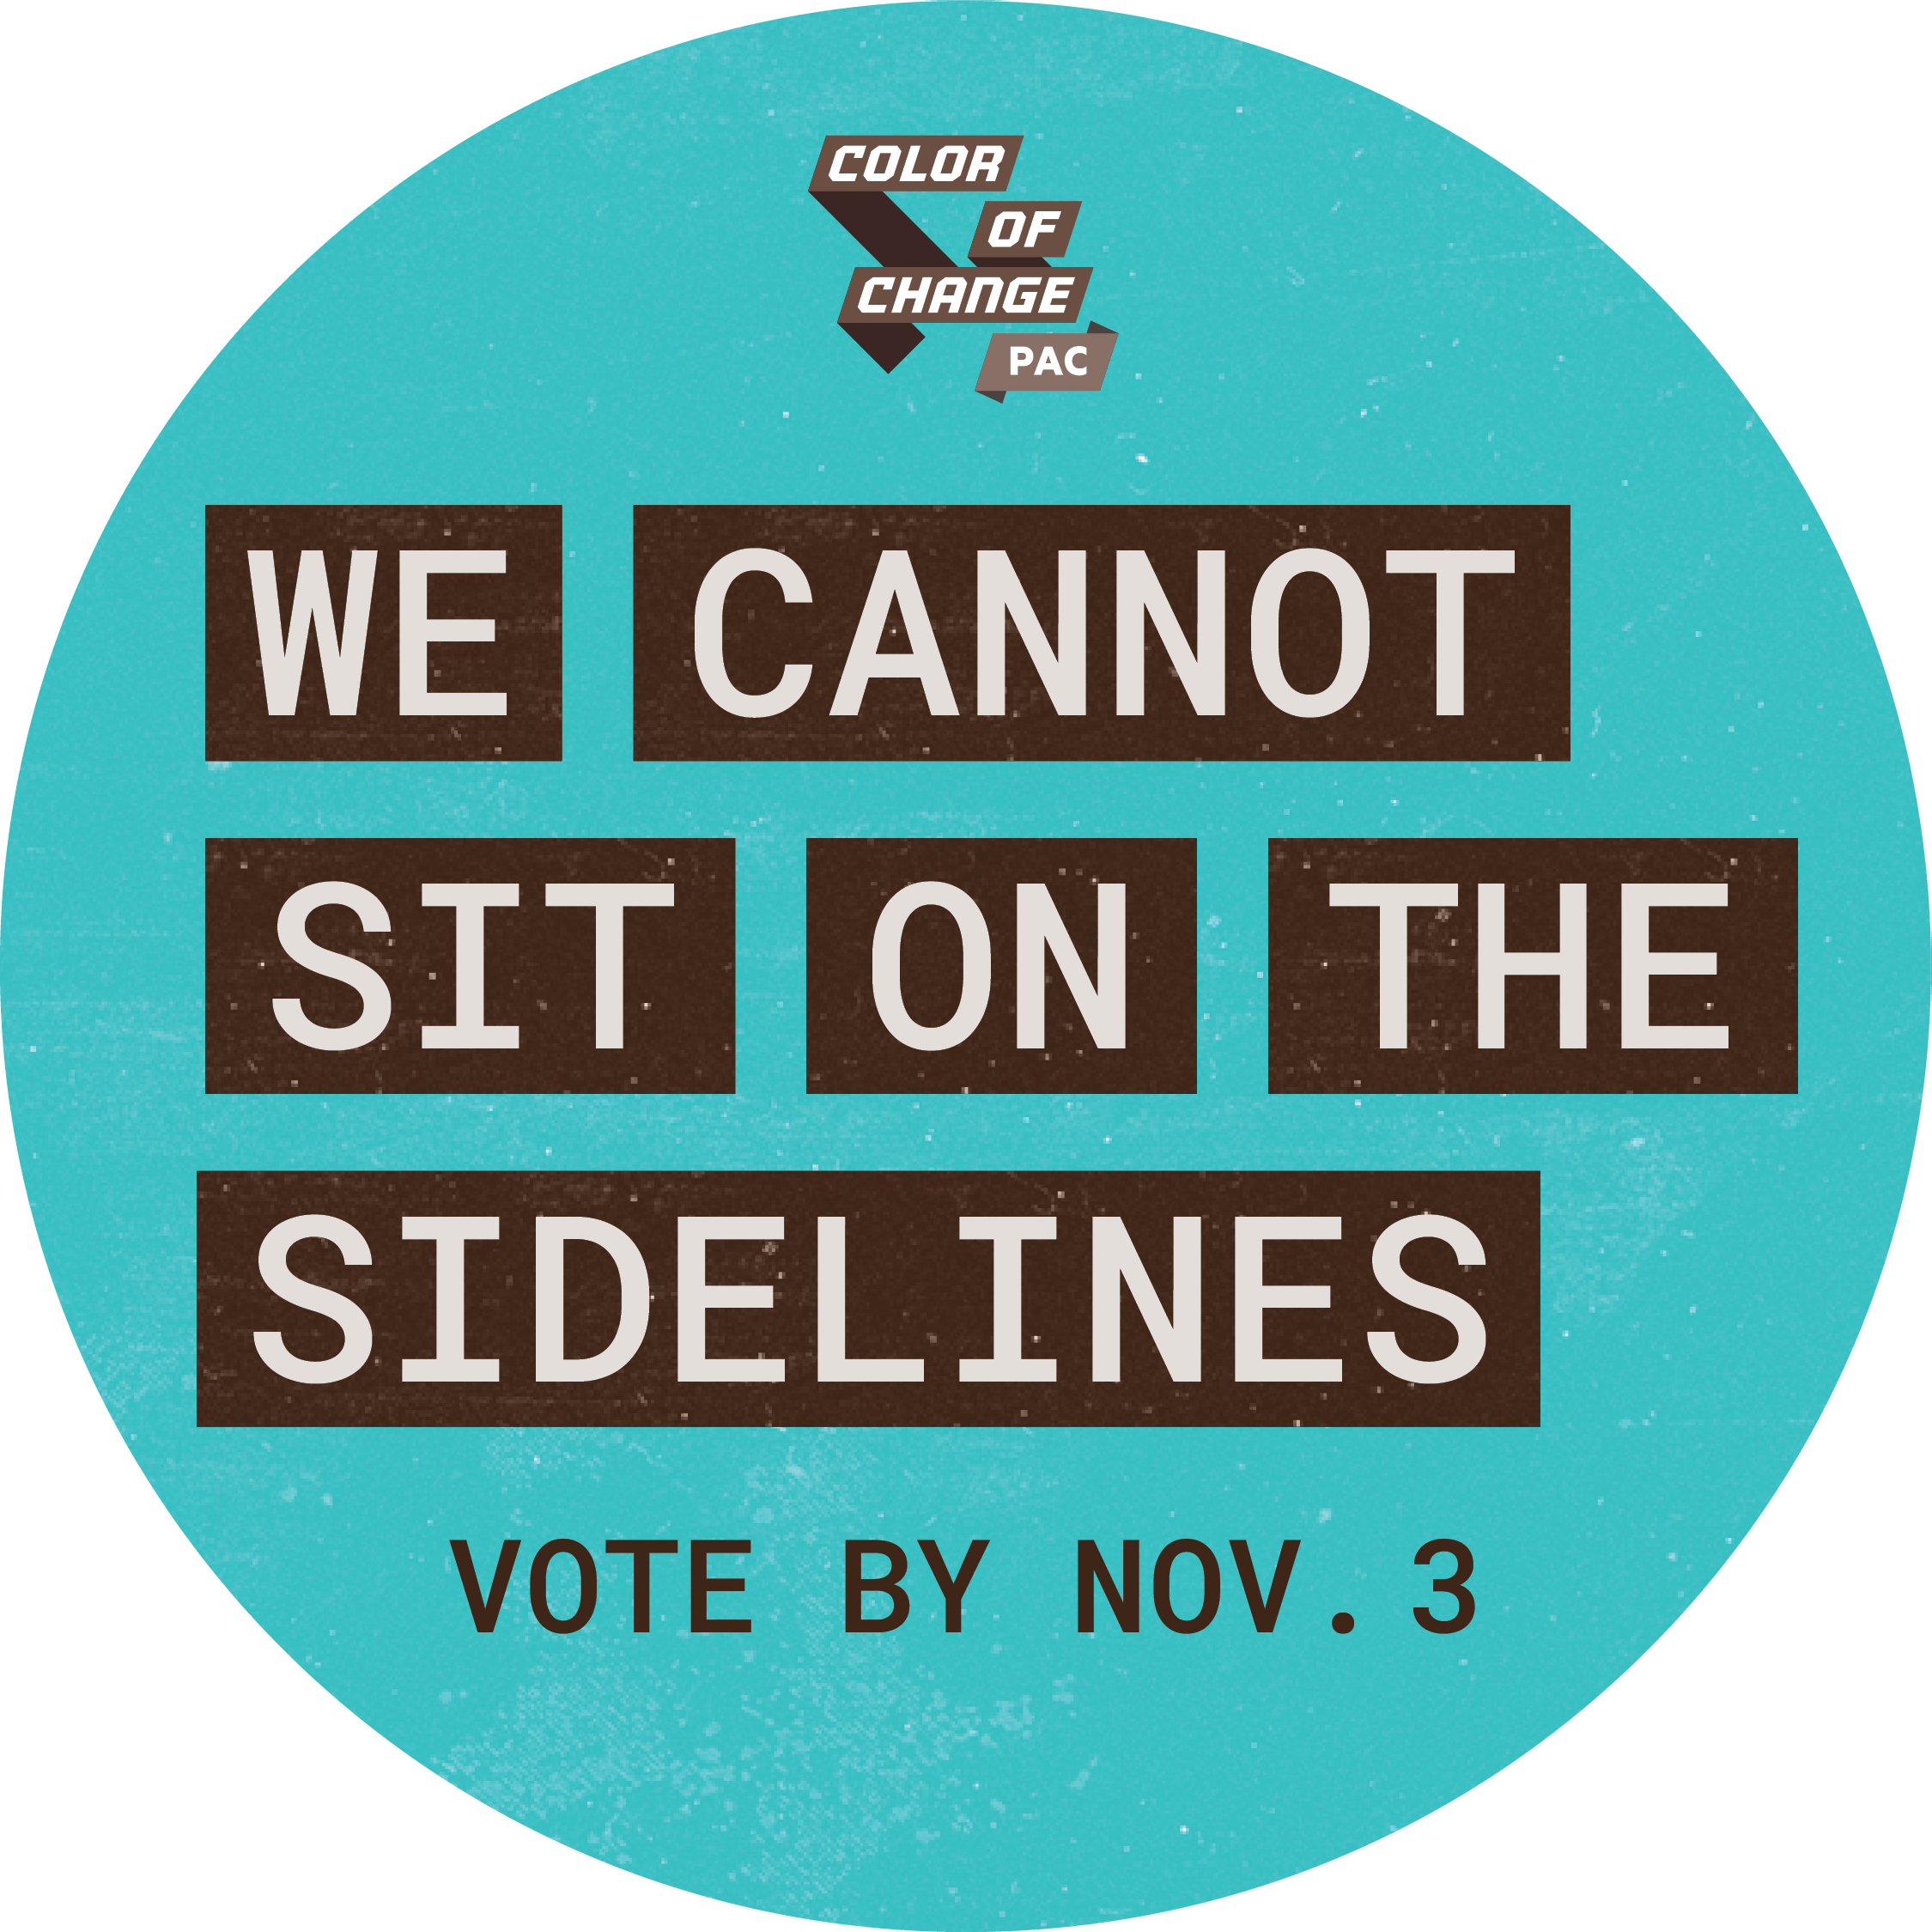 We cannot sit on the sidelines. Vote by Nov. 3